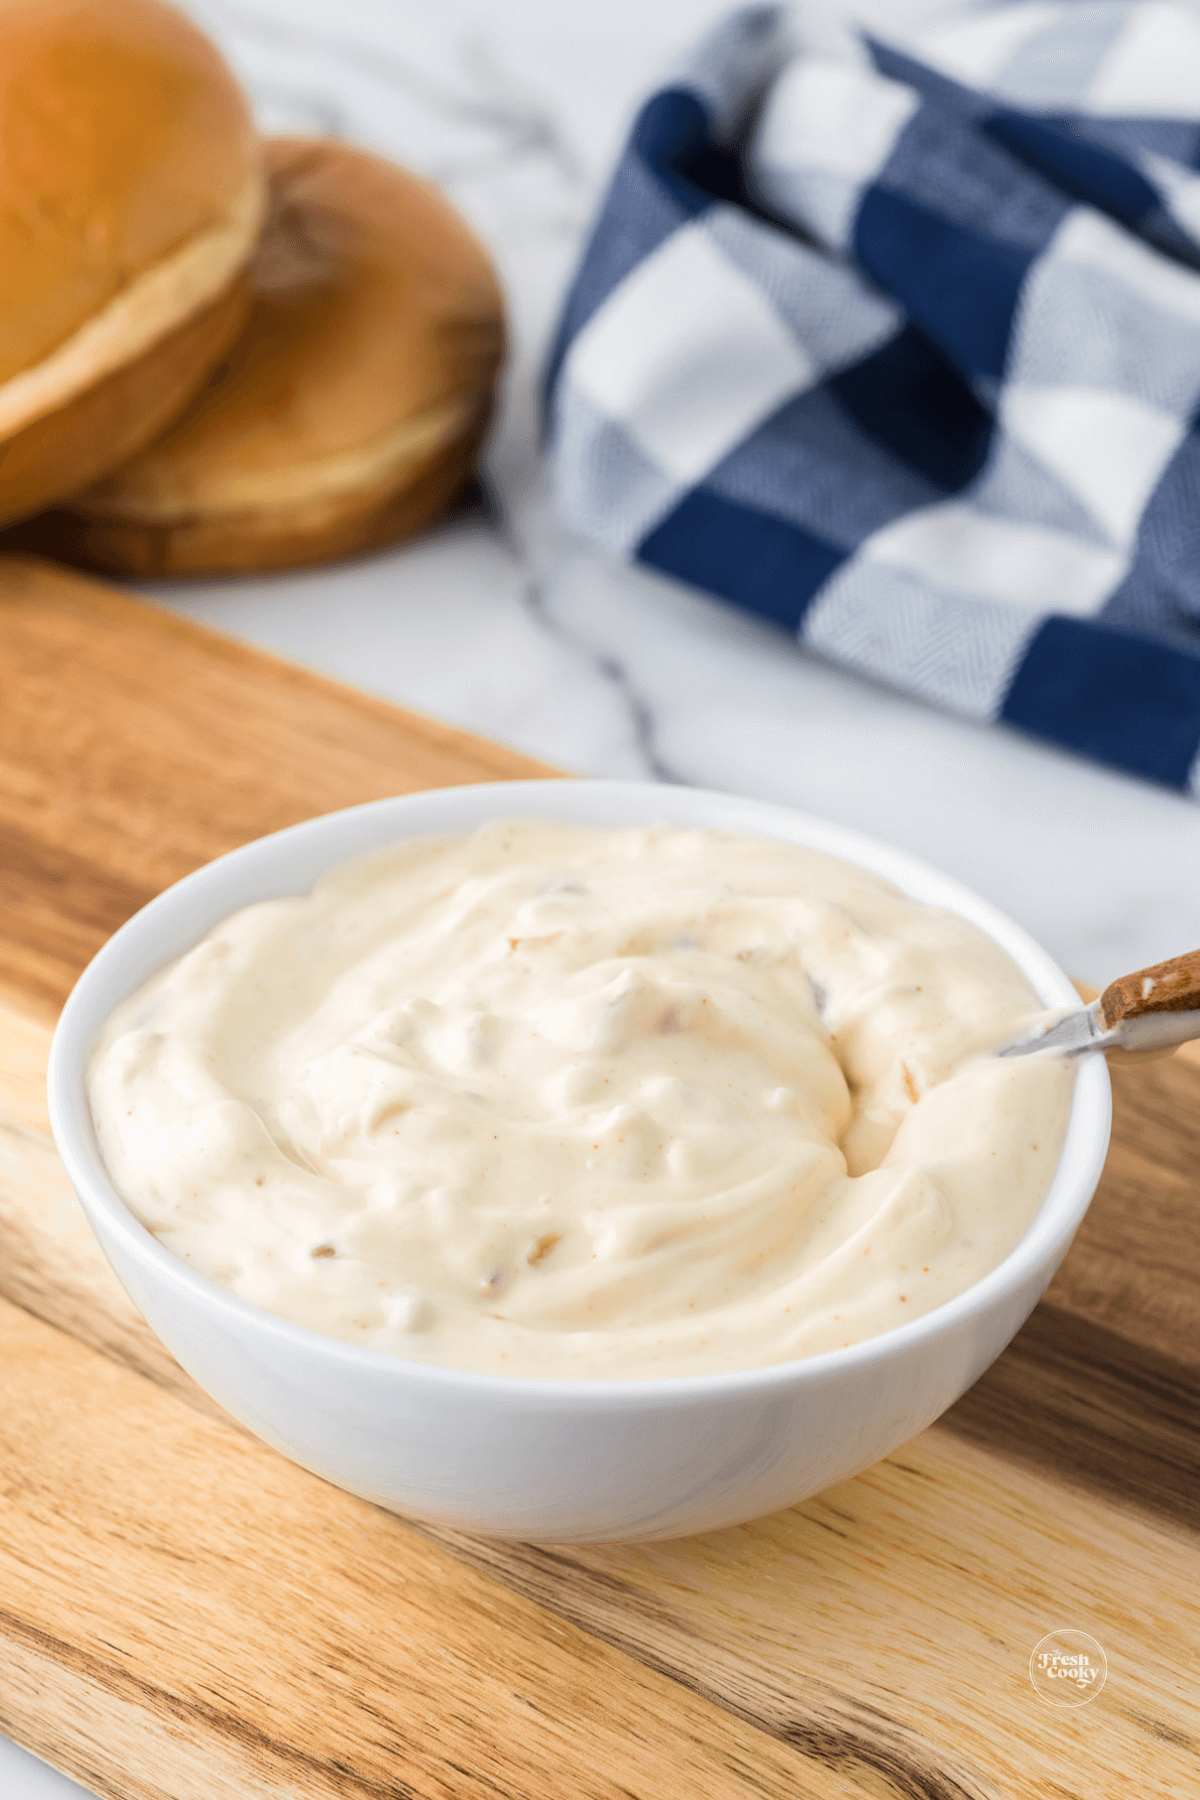 Spoon in bowl of creamy smashburger sauce.